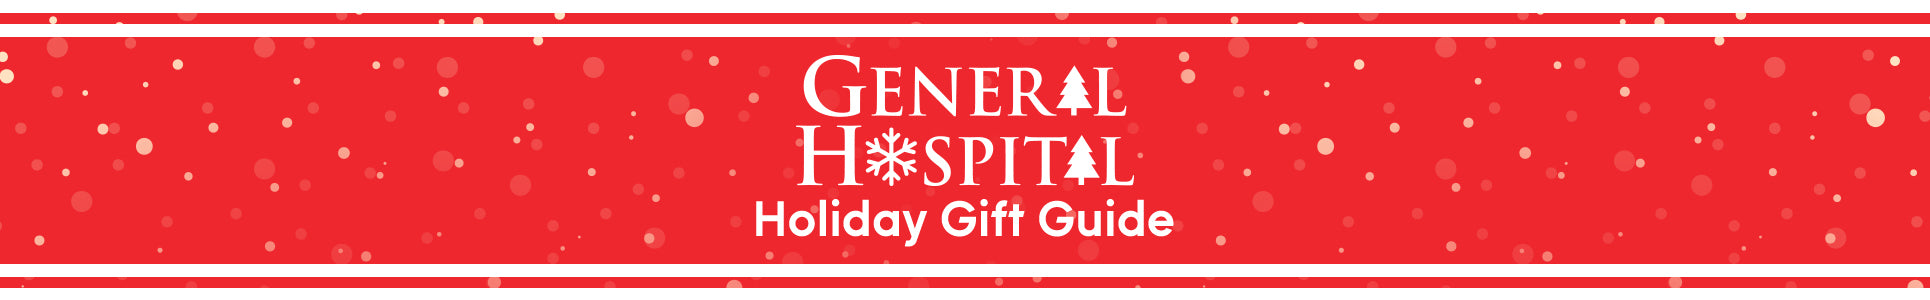 General Hospital Holiday Gift Guide banner